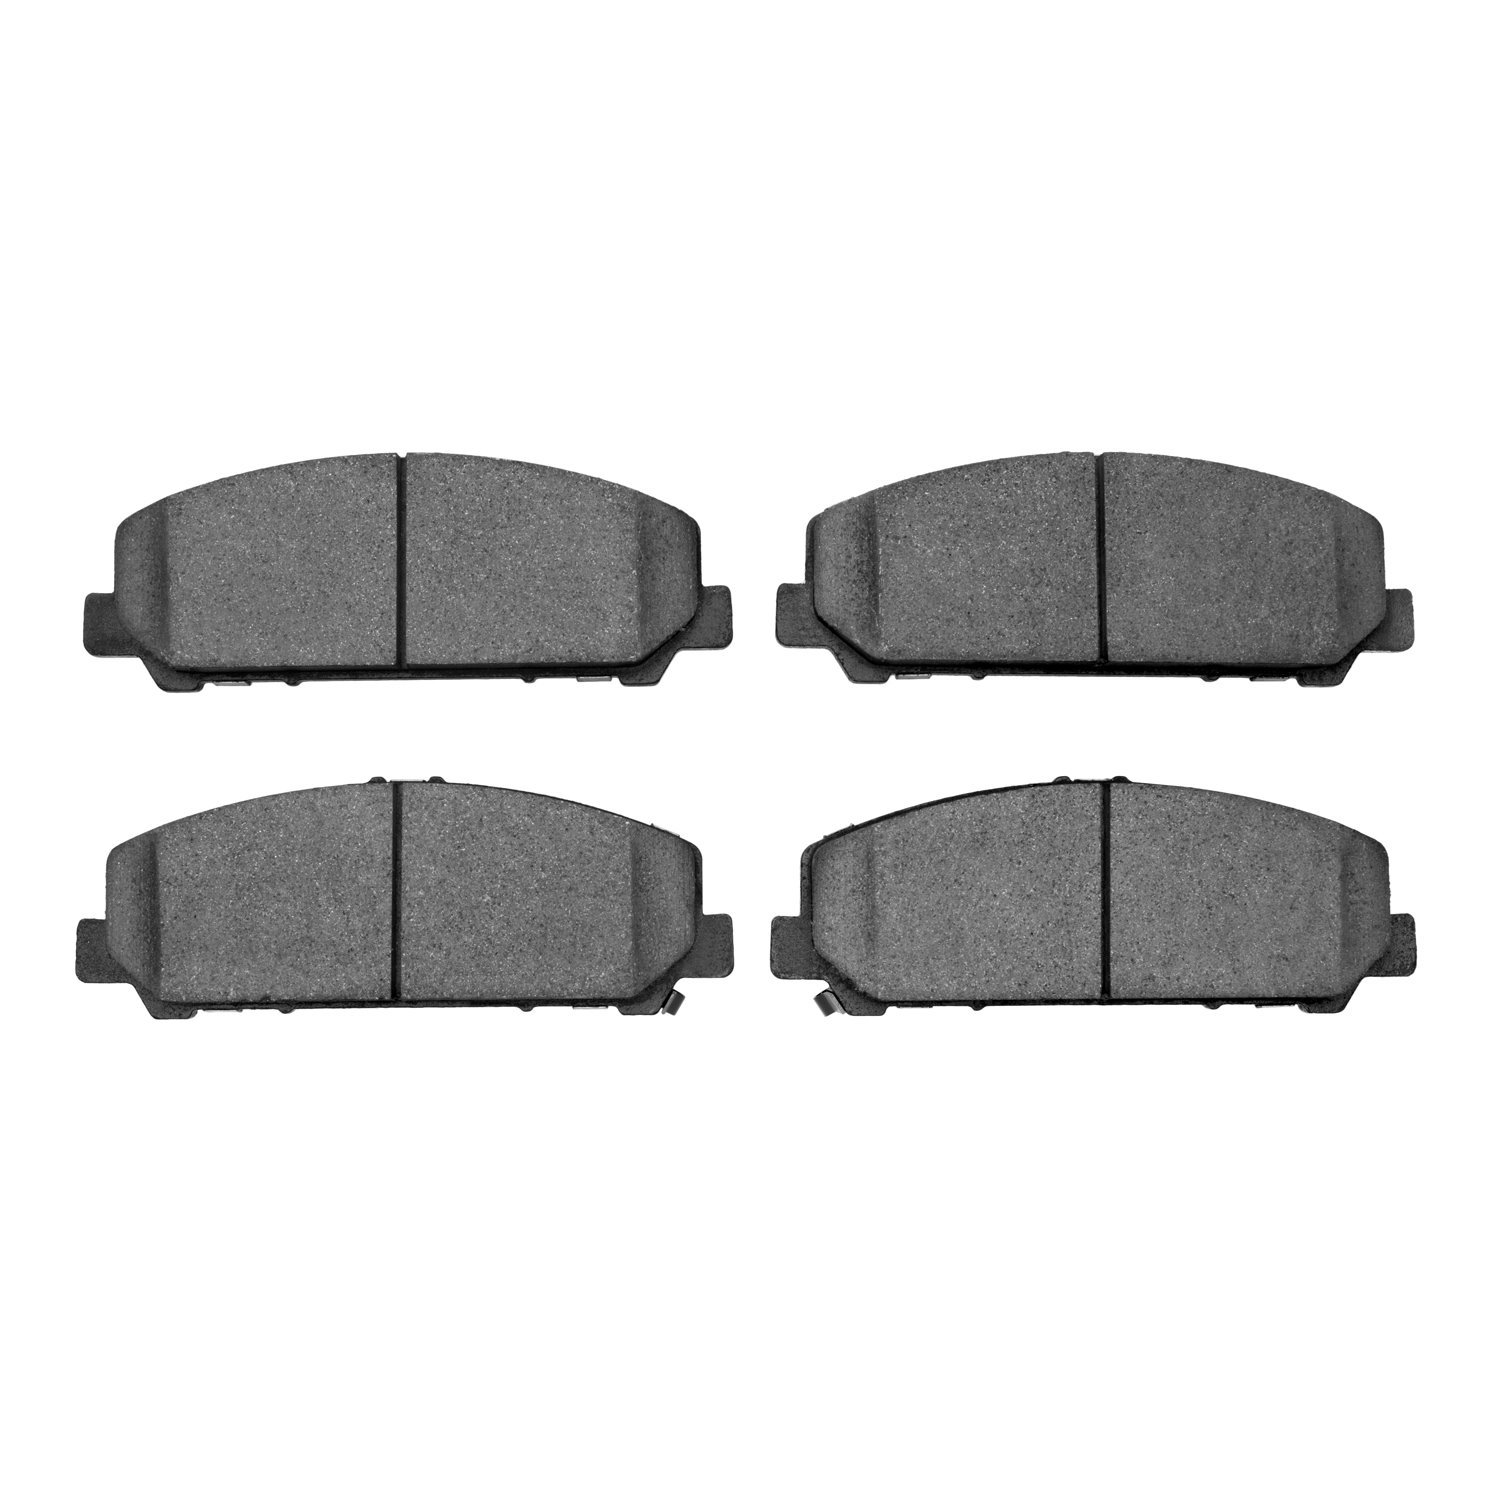 1310-1509-00 3000-Series Ceramic Brake Pads, Fits Select Infiniti/Nissan, Position: Front